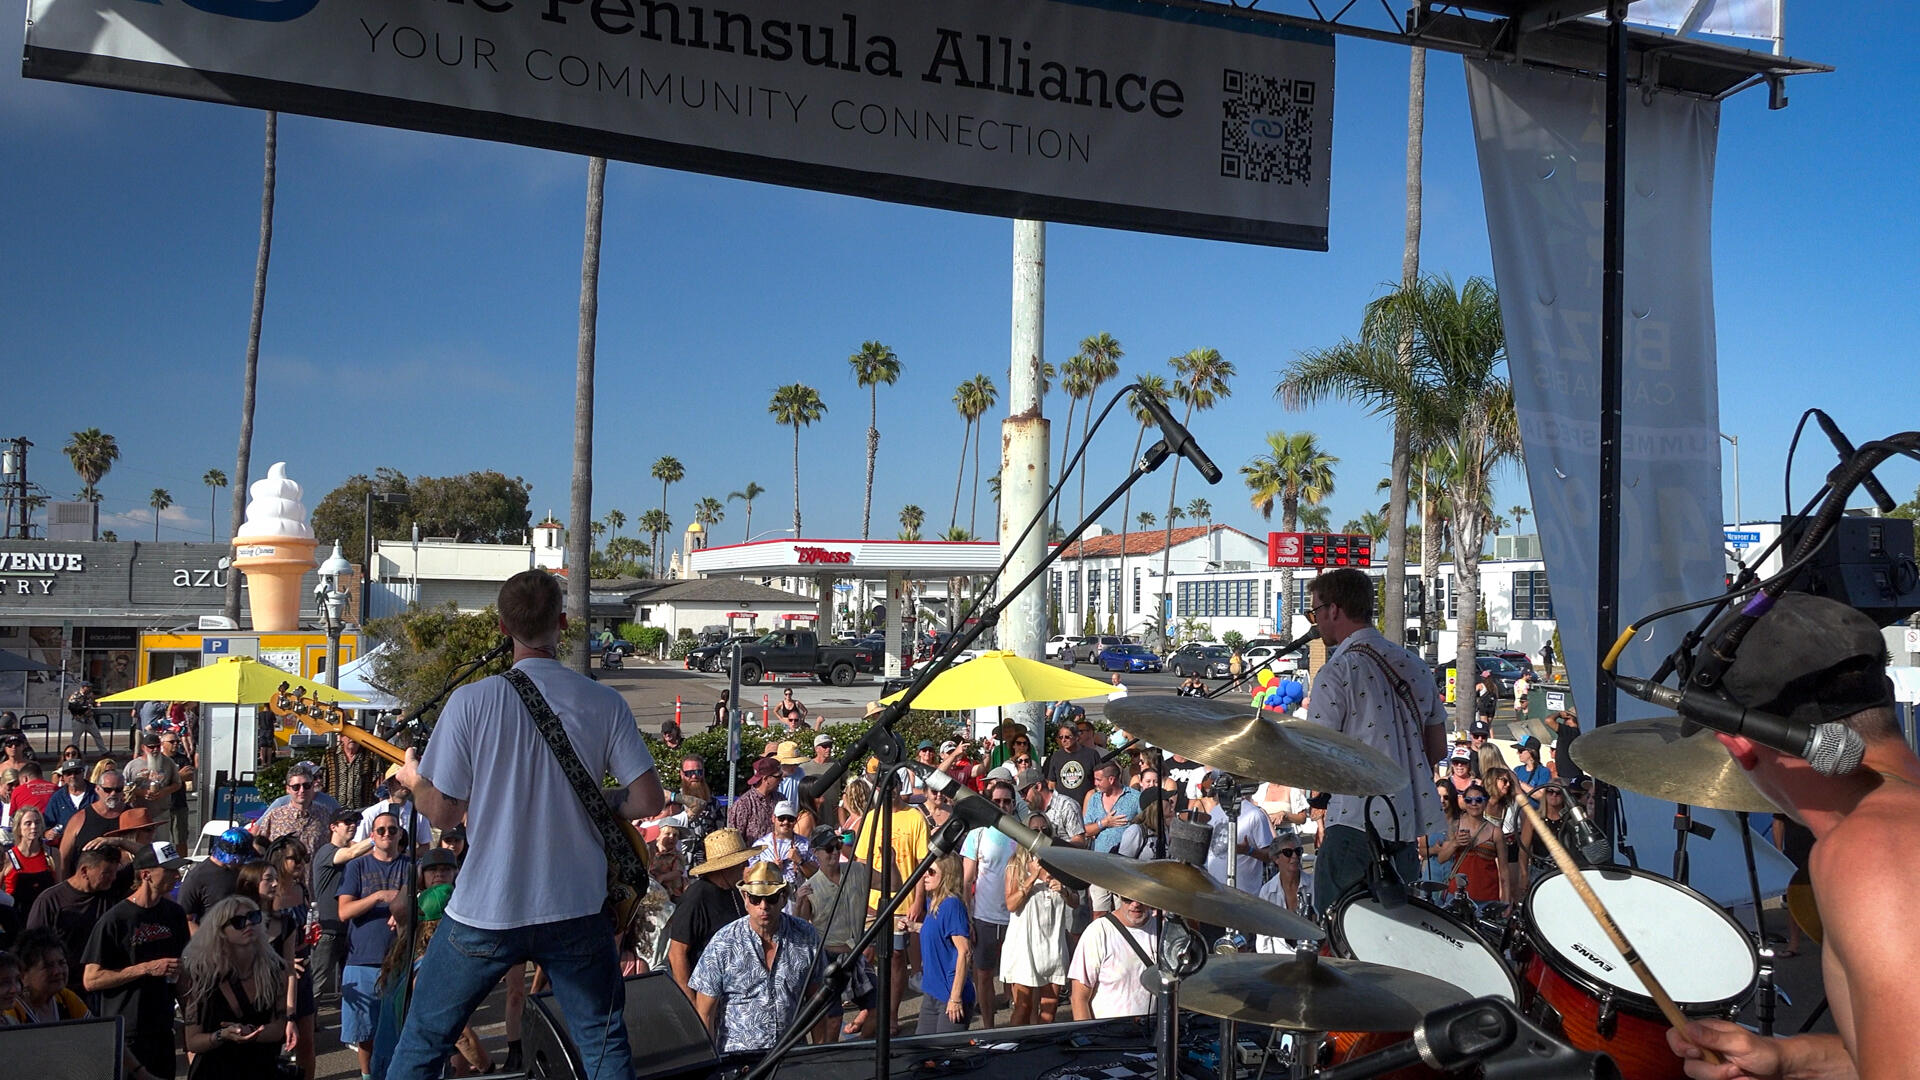 Photo of: 2024 Ocean Beach Street Fair and Chili Cook-Off - 92017 Stage and Vendors